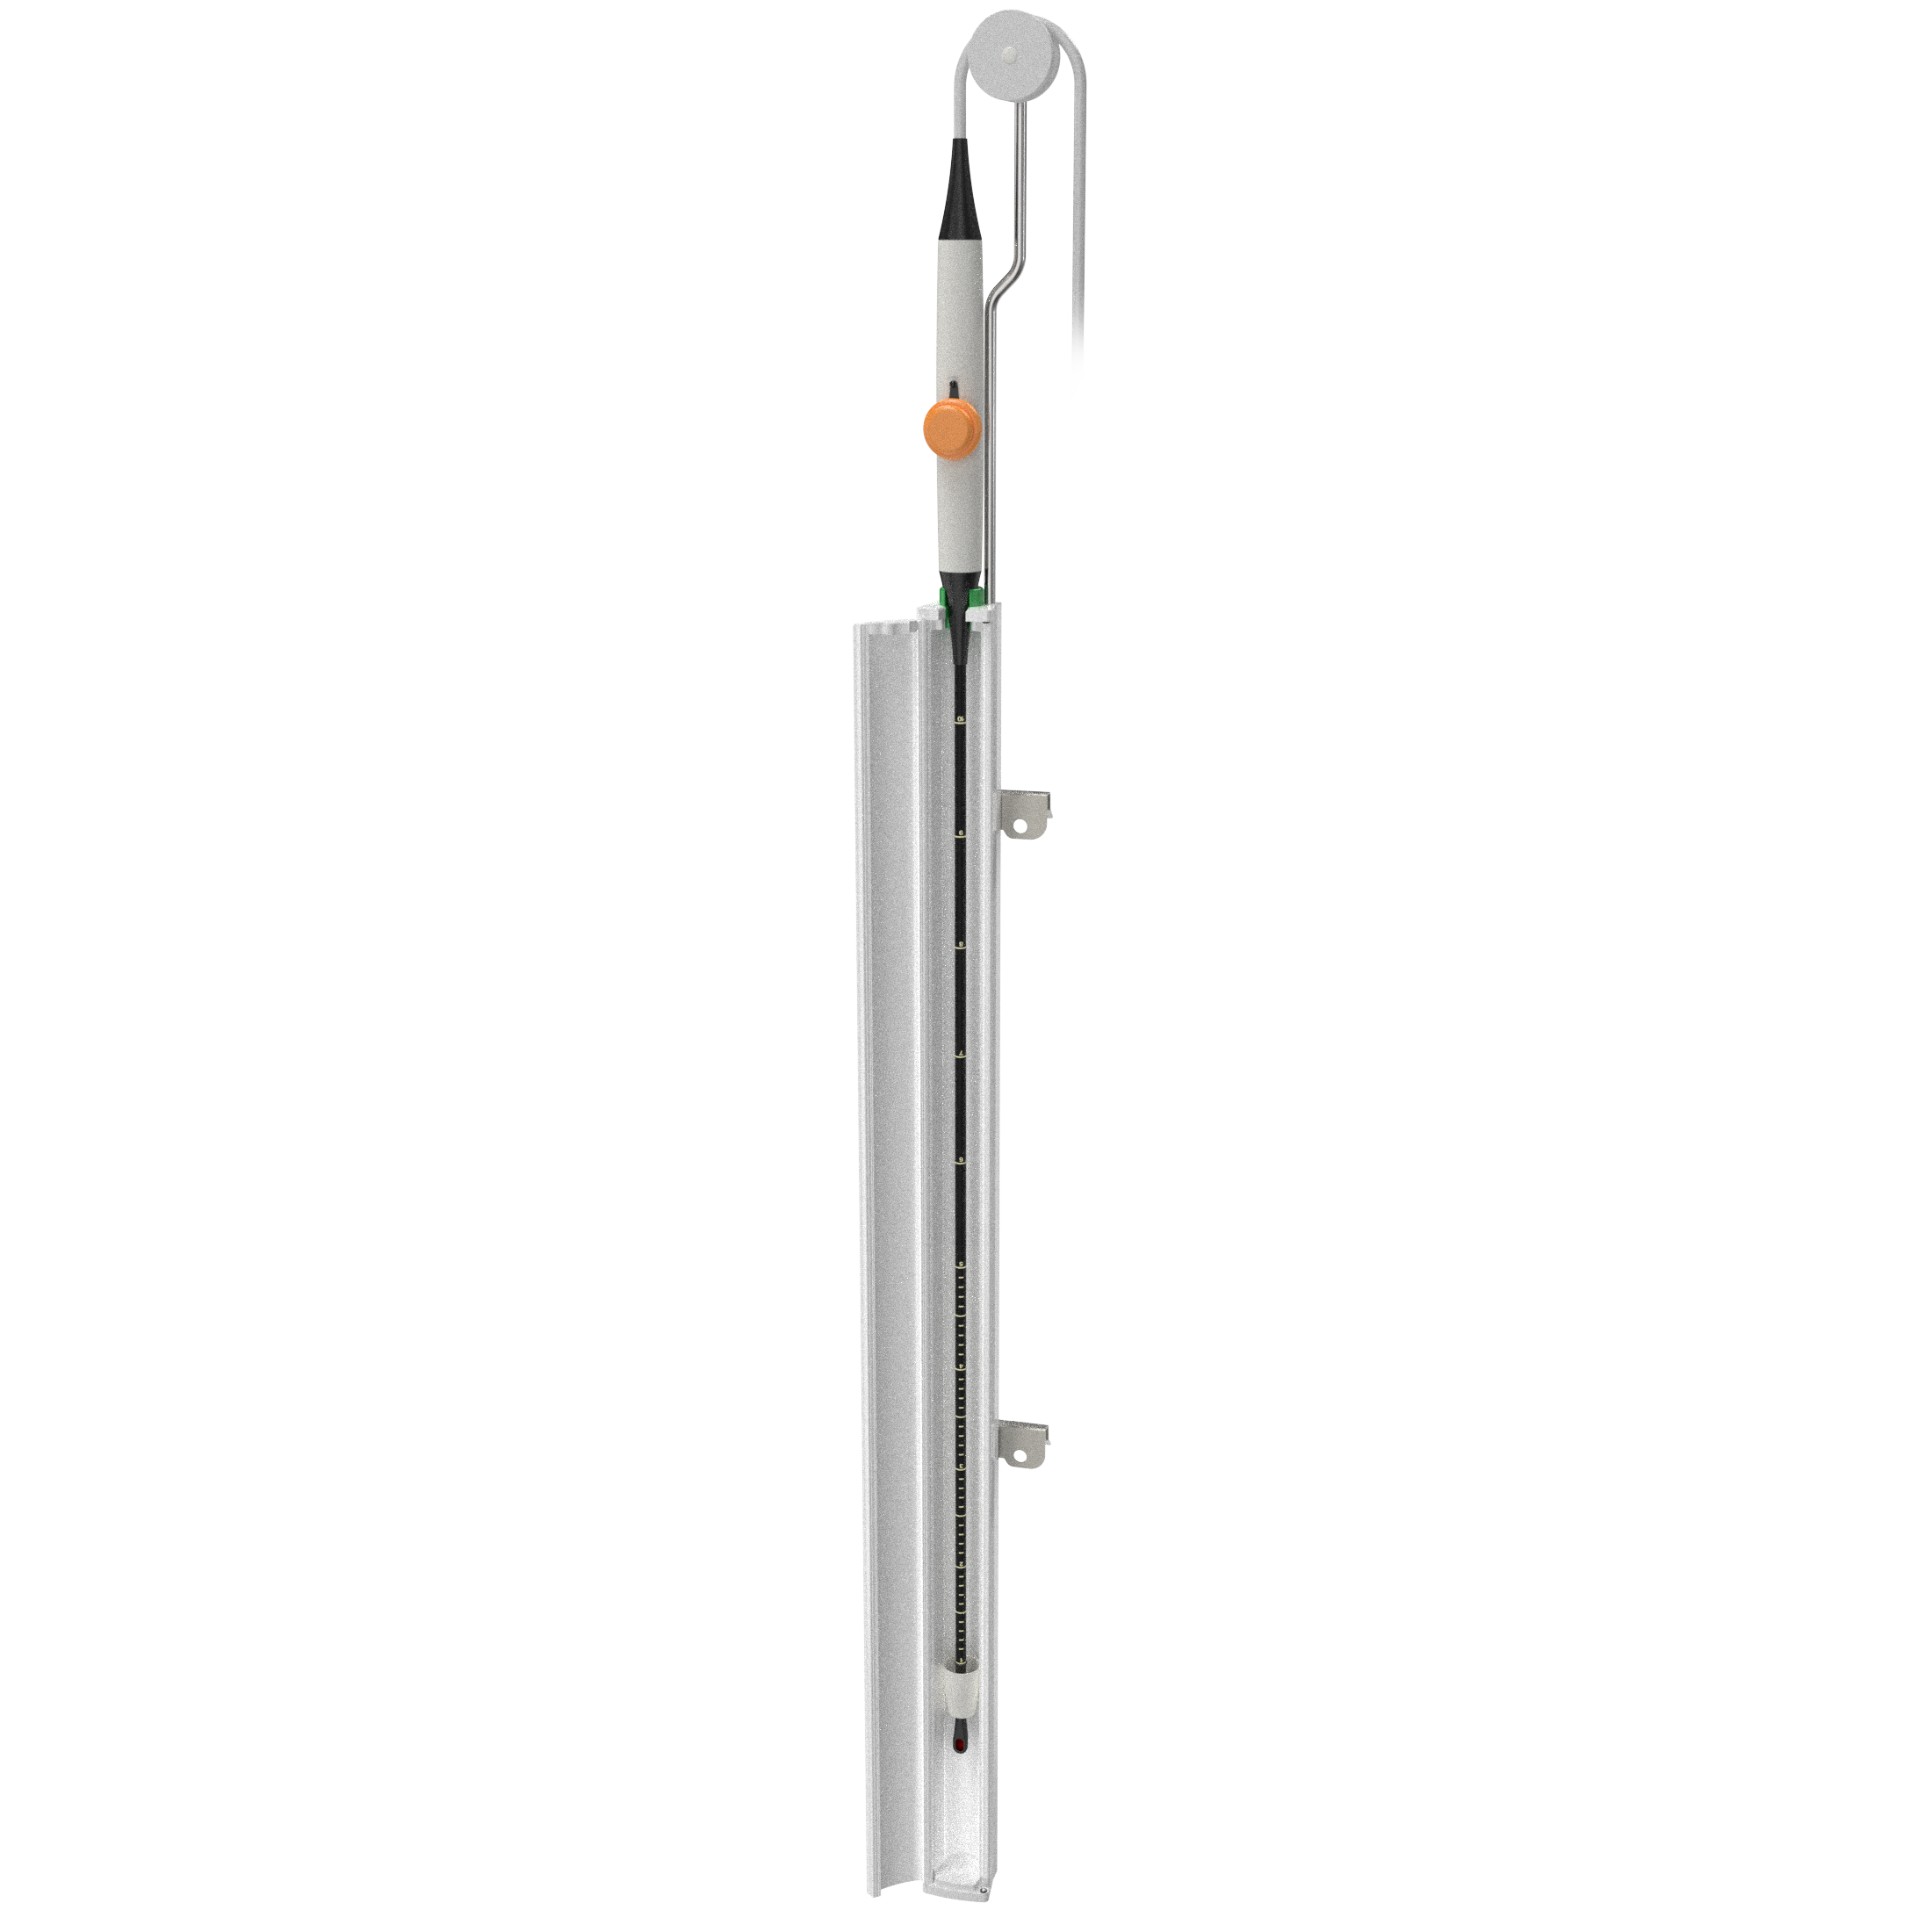 Protector for device standard rail, green insert